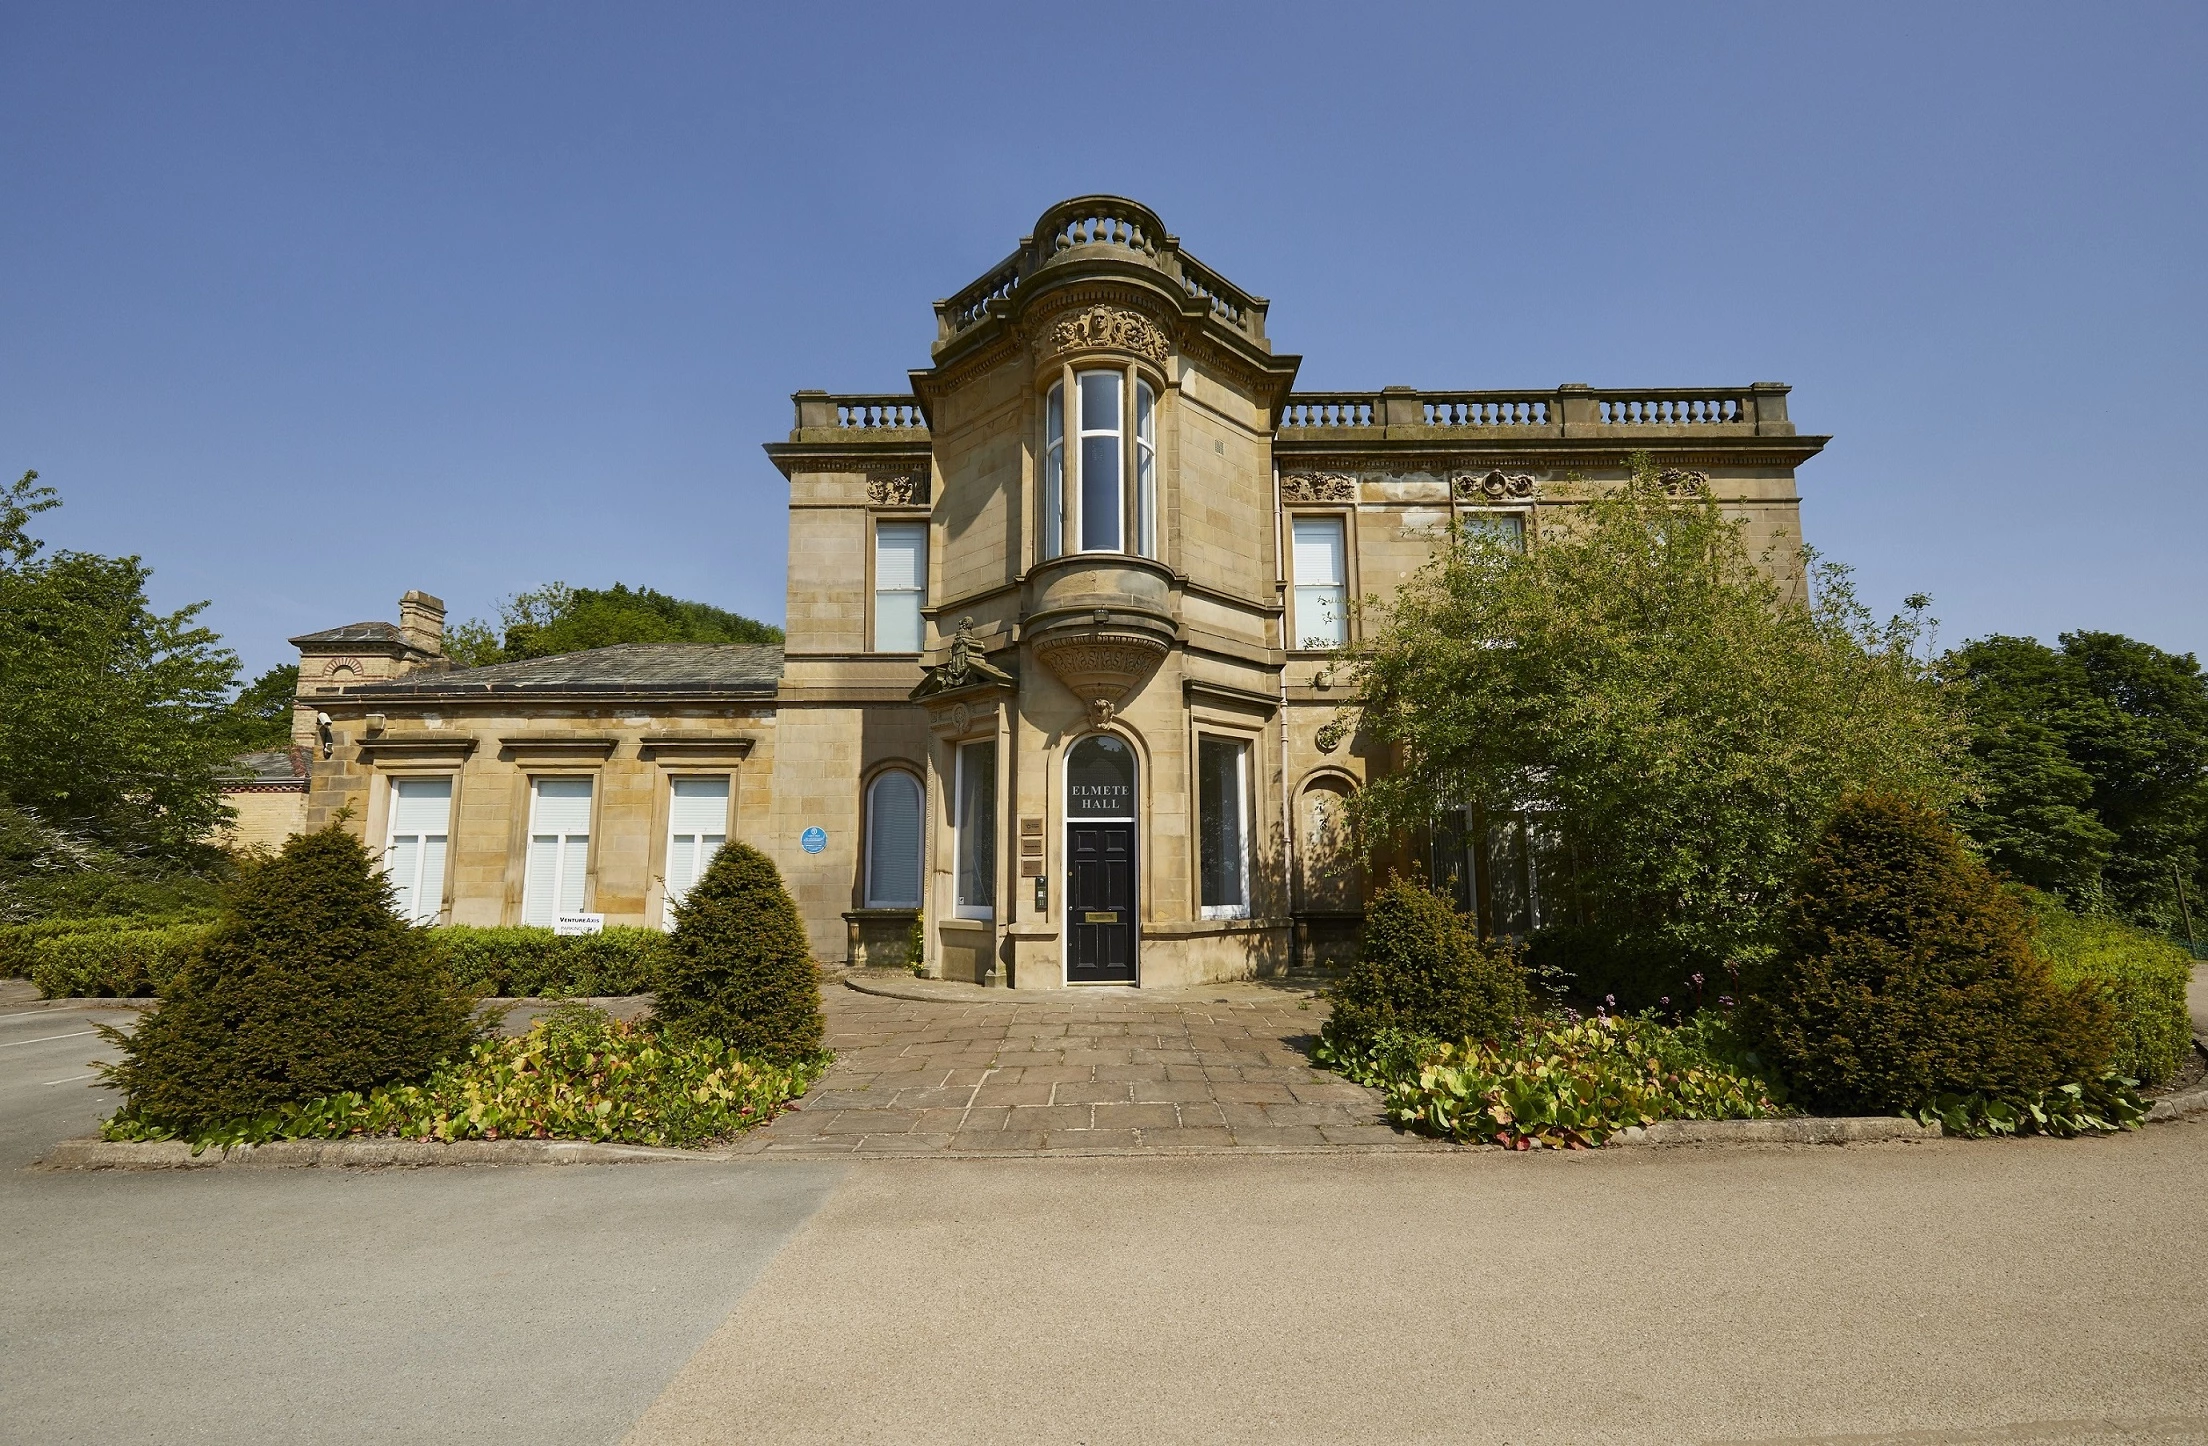 Elmete Hall was built in 1815 by the Nicholson family of Roundhay Park